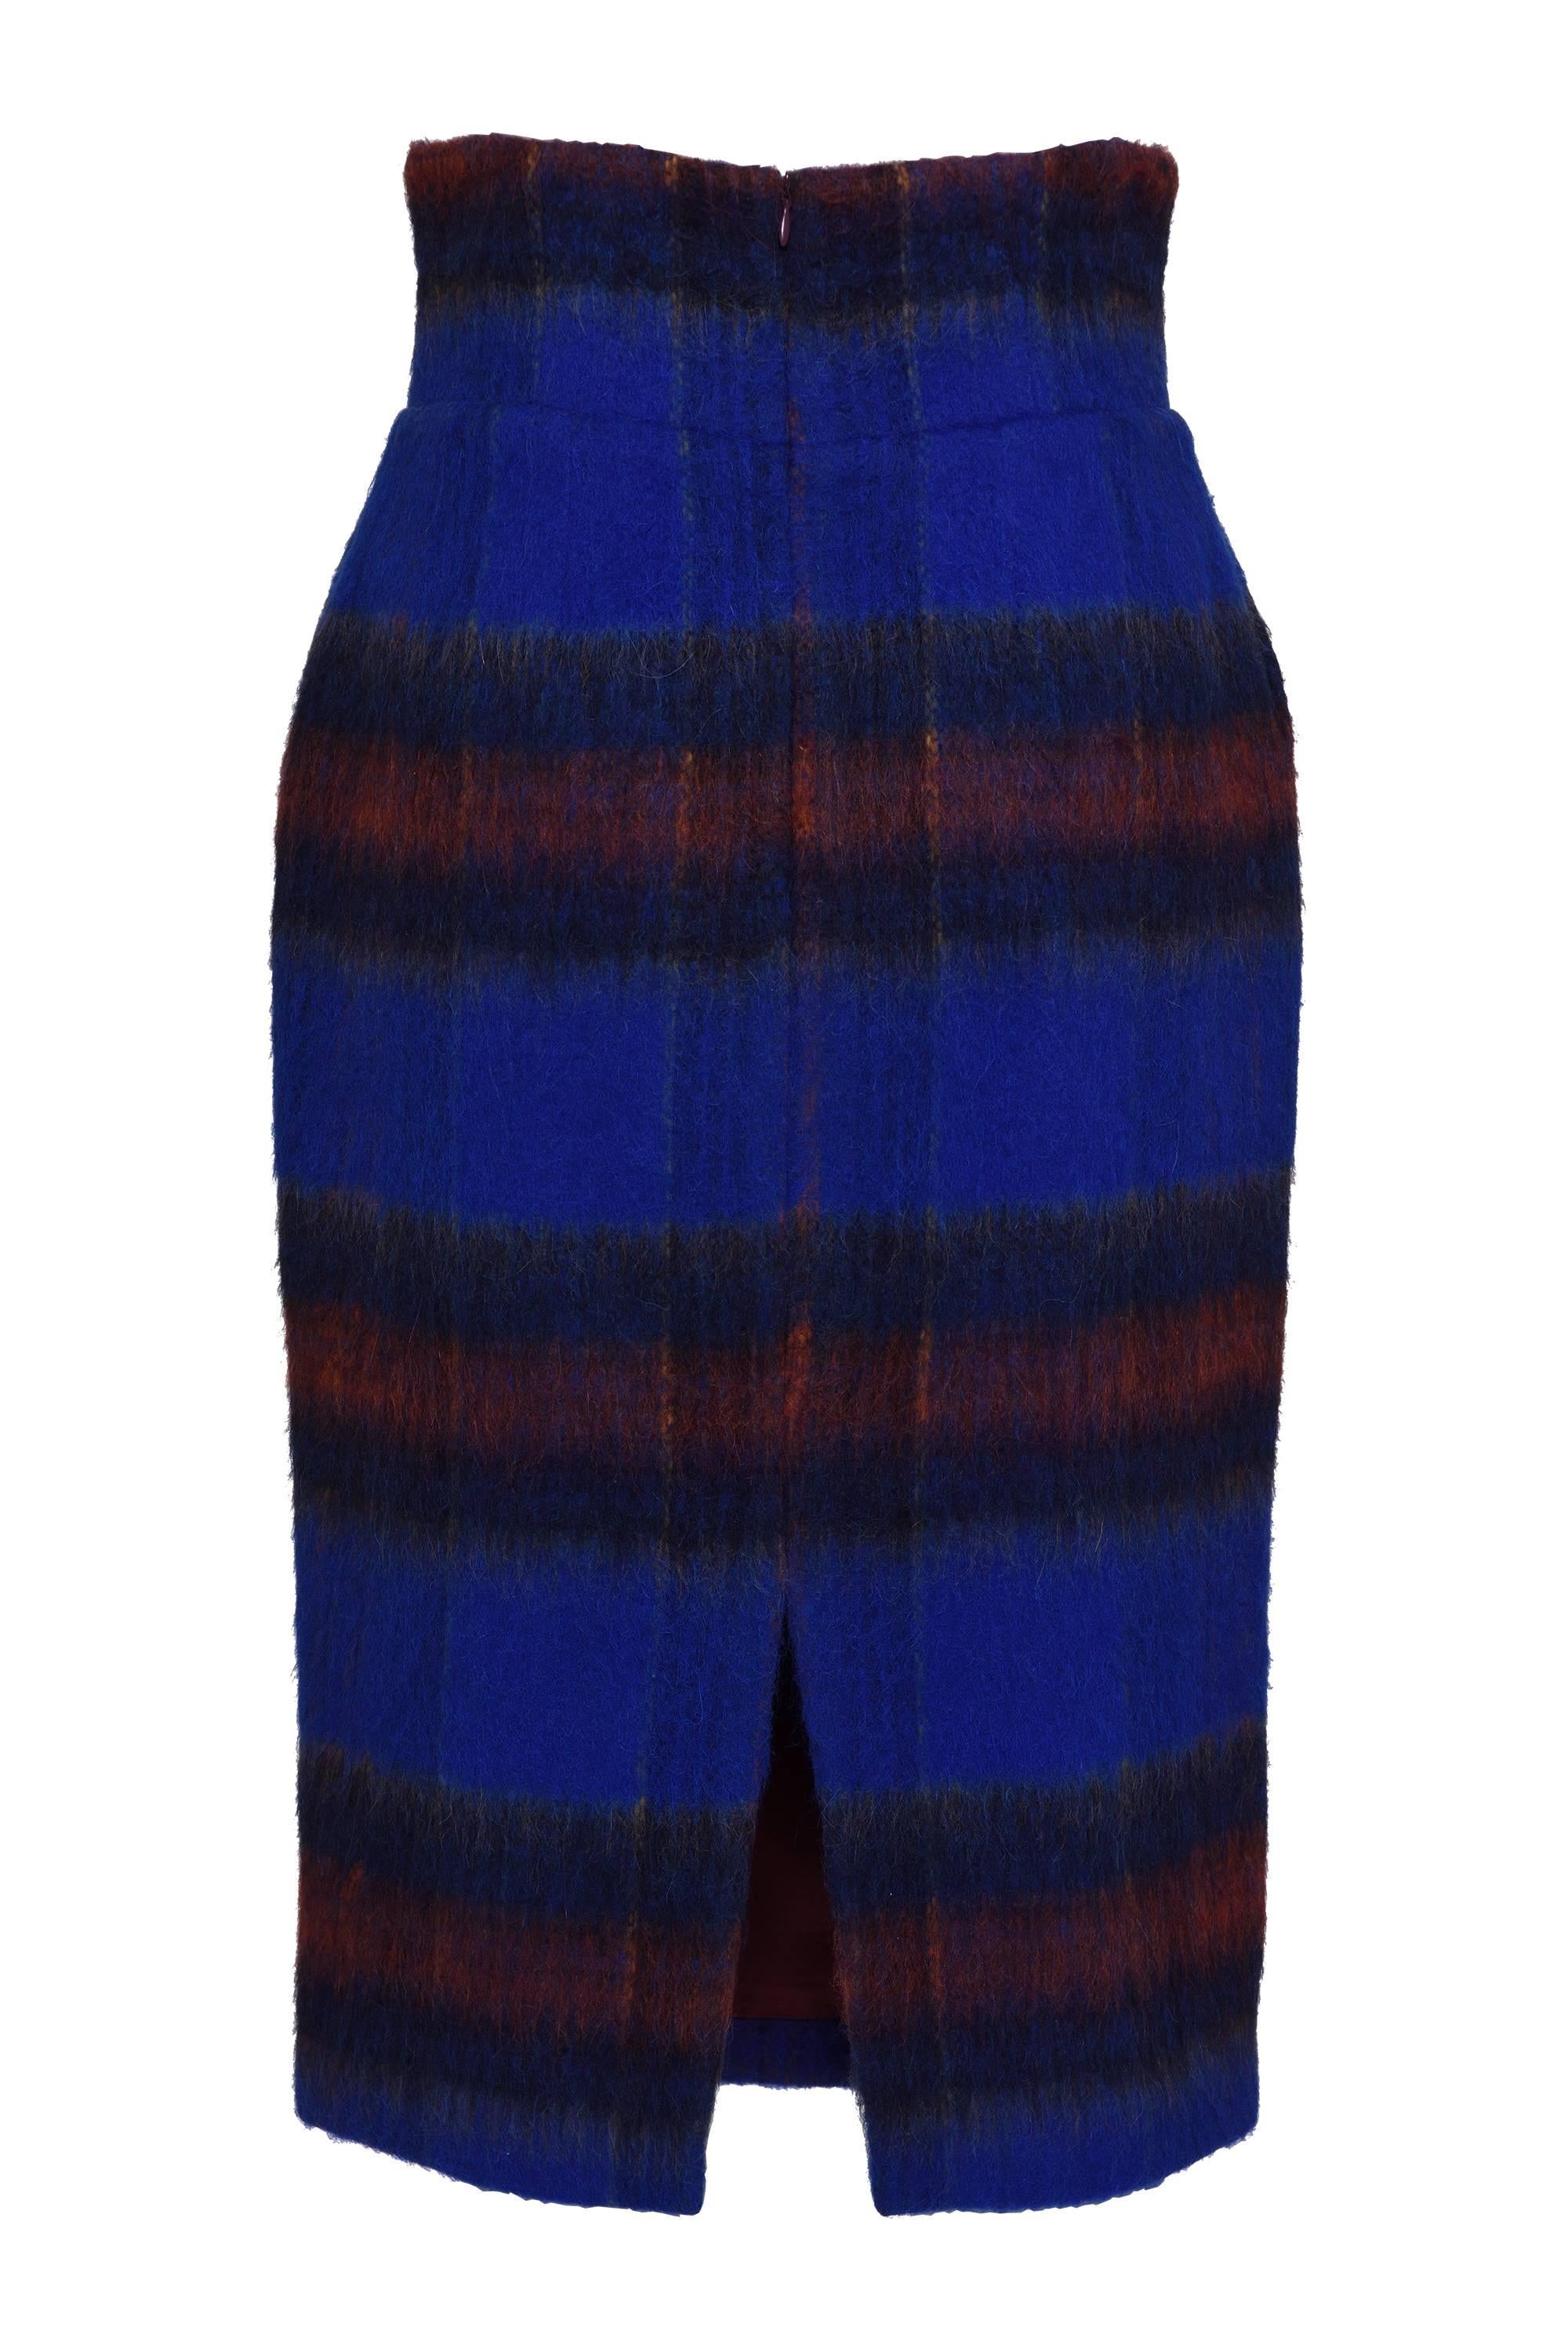 STELLA JEAN ITALY Mohair, wool and alpaca tartan pencil skirt.
It has two frontal pockets, with royal blue and burgundy tartan check, high waist, and back zip closure, fully lined. Made in Italy.

Excellent Condition 

Label: STELLA JEAN Made in